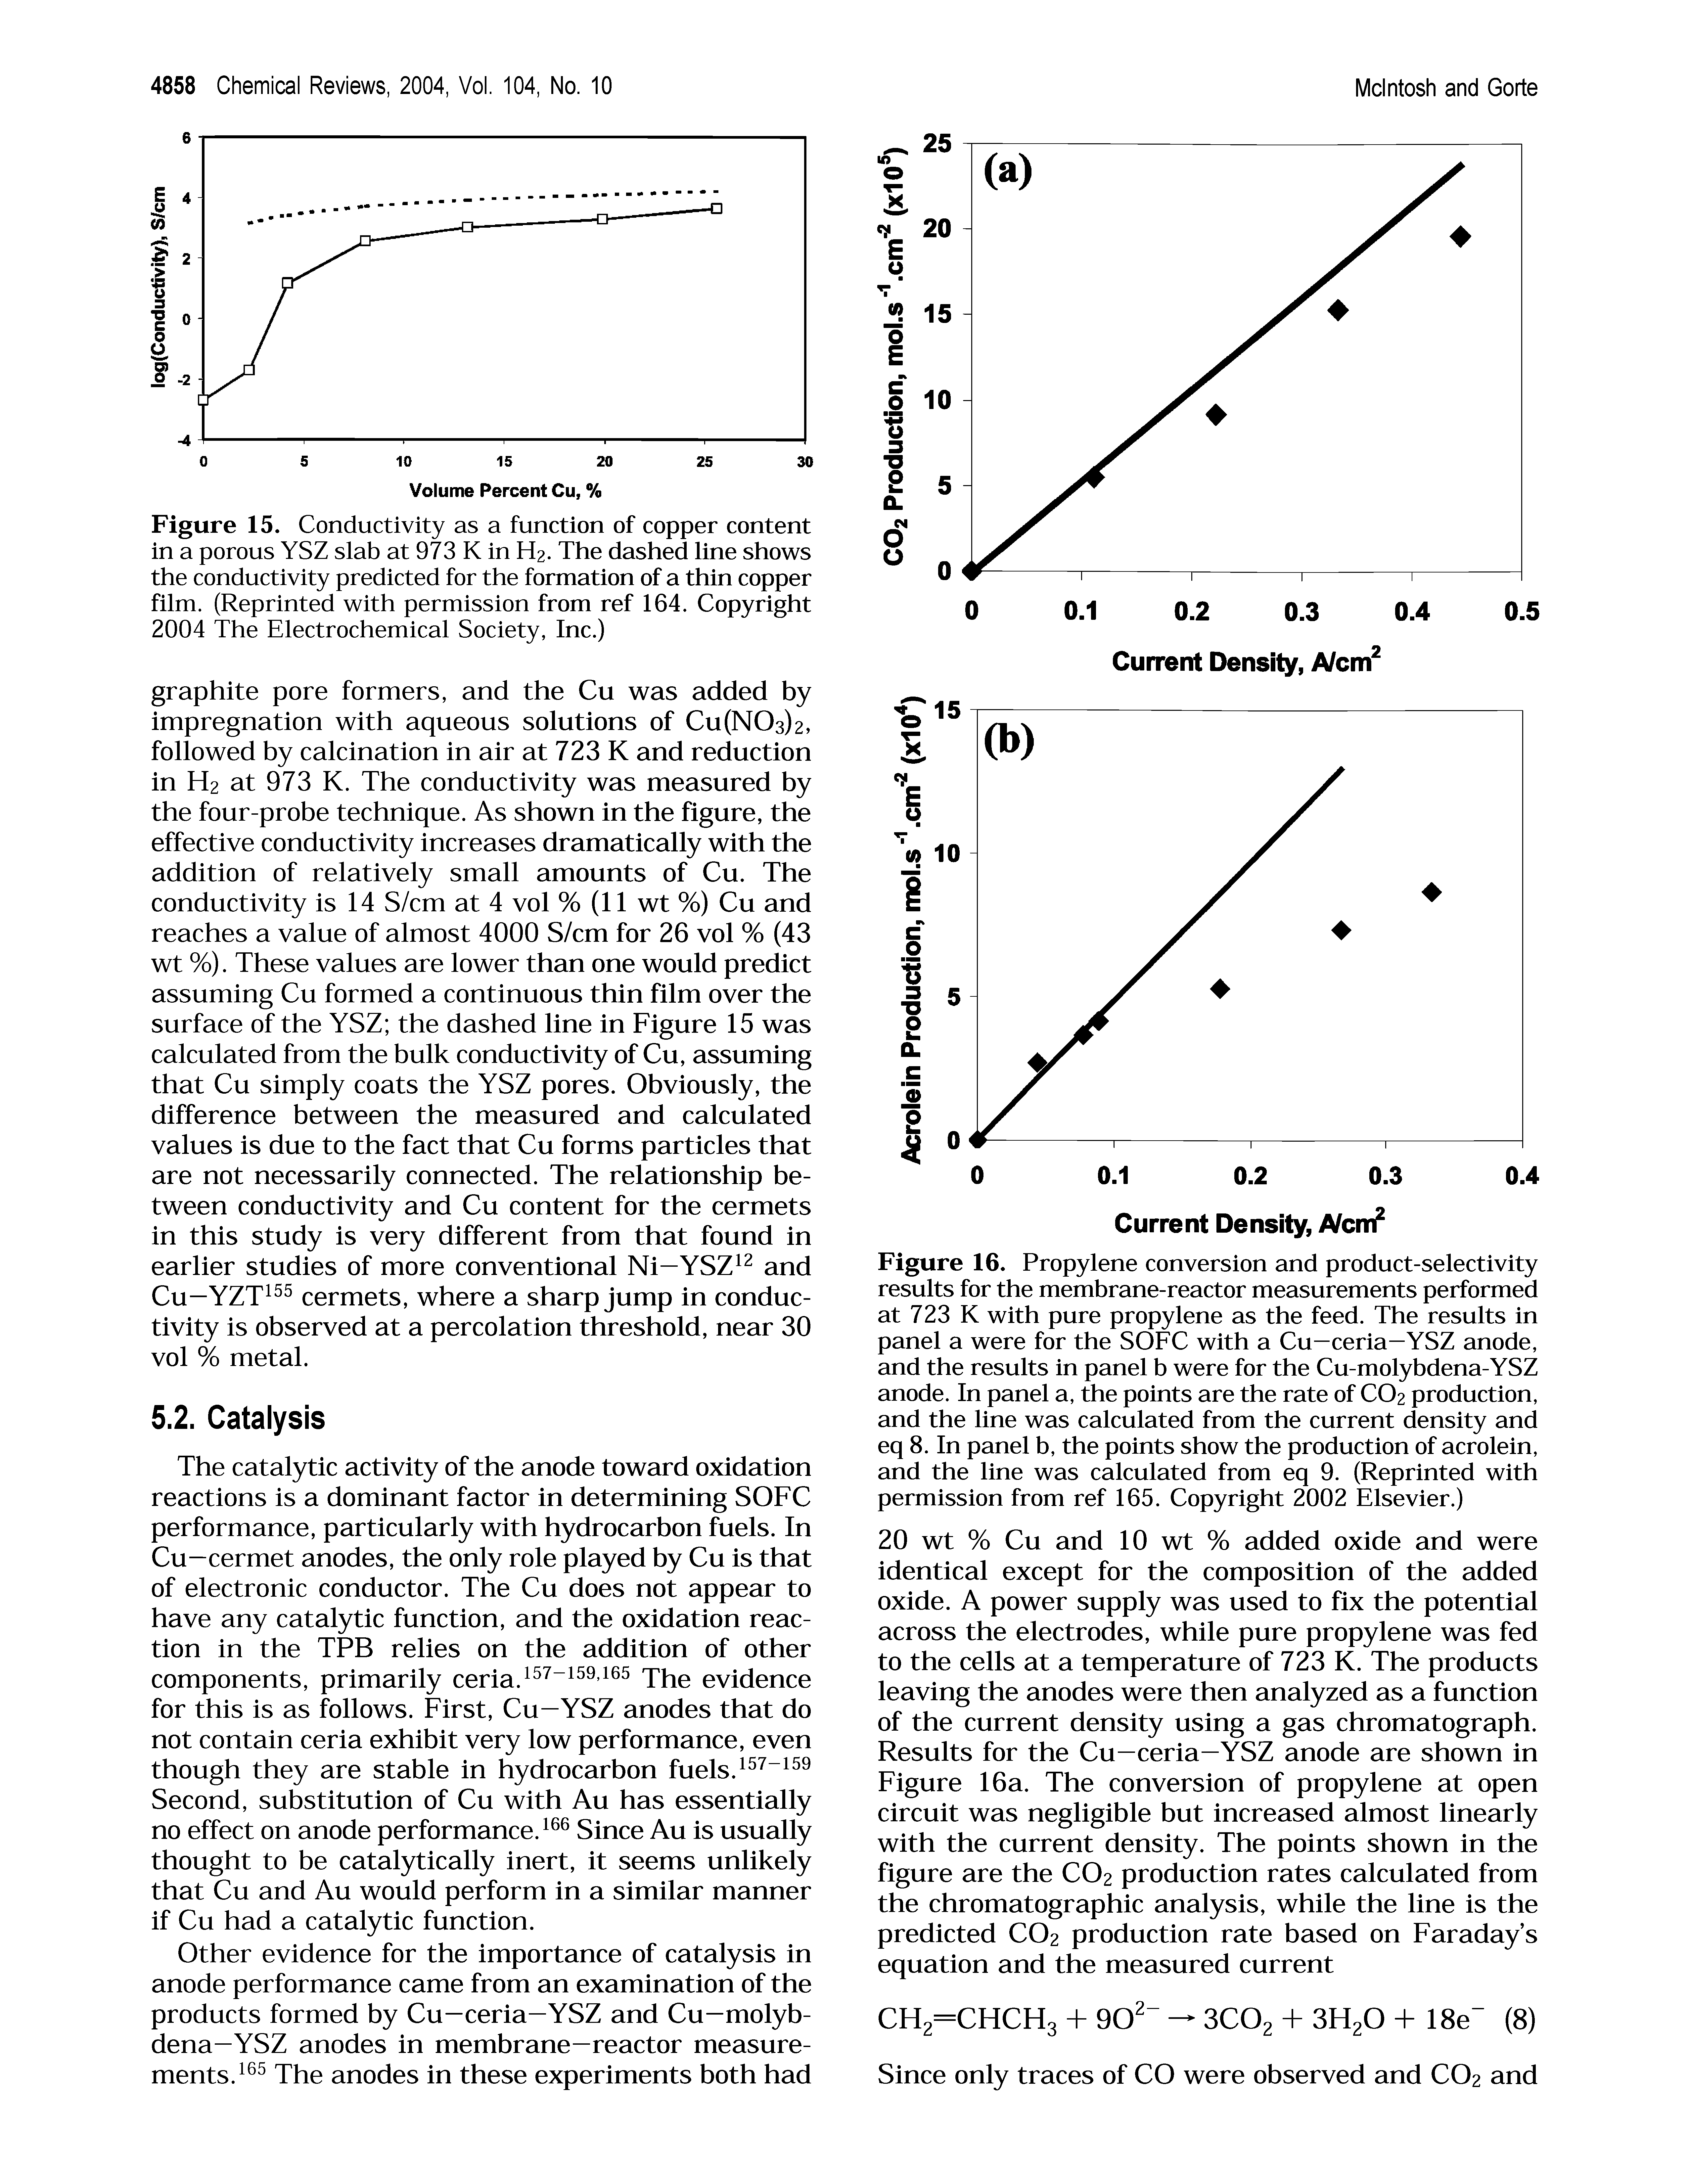 Figure 15. Conductivity as a function of copper content in a porous YSZ slab at 973 K in H2. The dashed line shows the conductivity predicted for the formation of a thin copper film. (Reprinted with permission from ref 164. Copyright 2004 The Electrochemical Society, Inc.)...